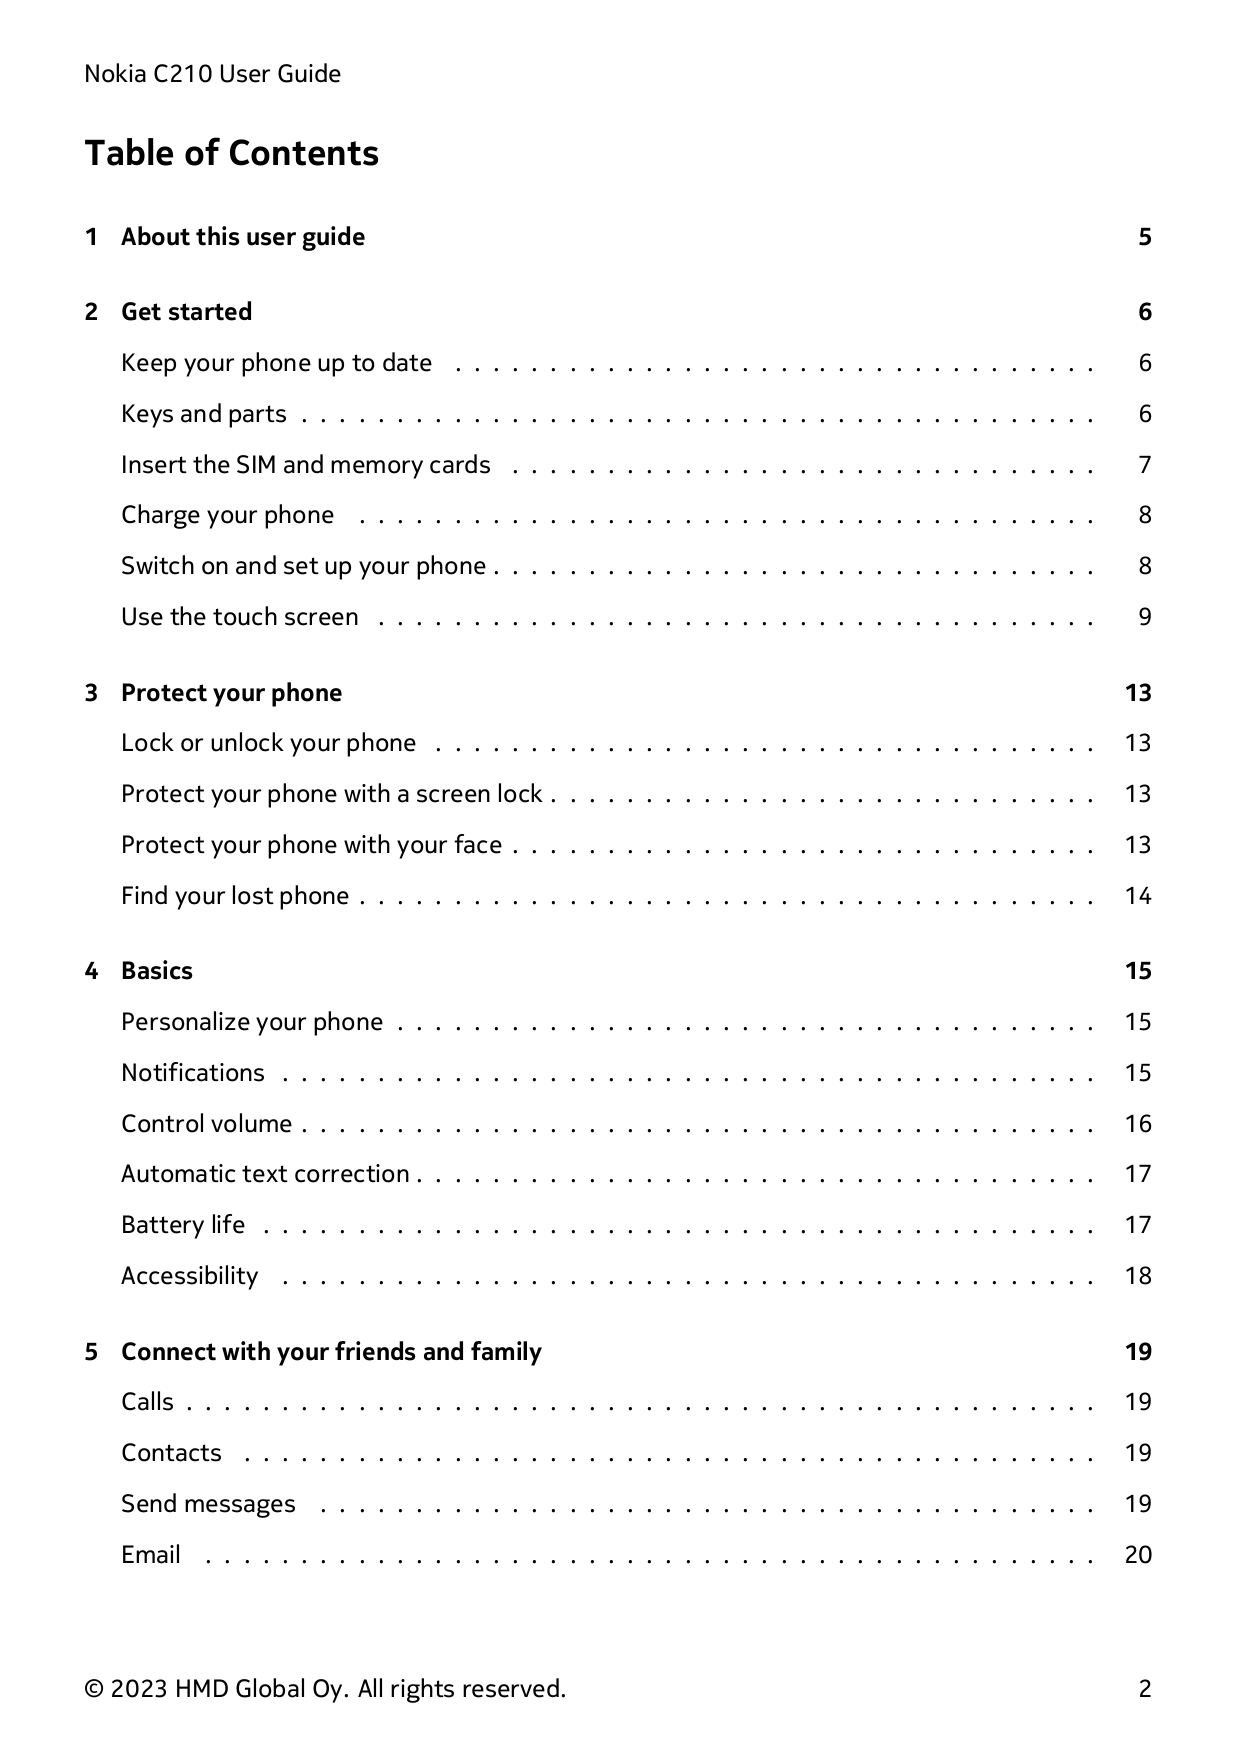 Nokia C210 User GuideTable of Contents1 About this user guide52 Get started6Keep your phone up to date . . . . . . . . . . . . .